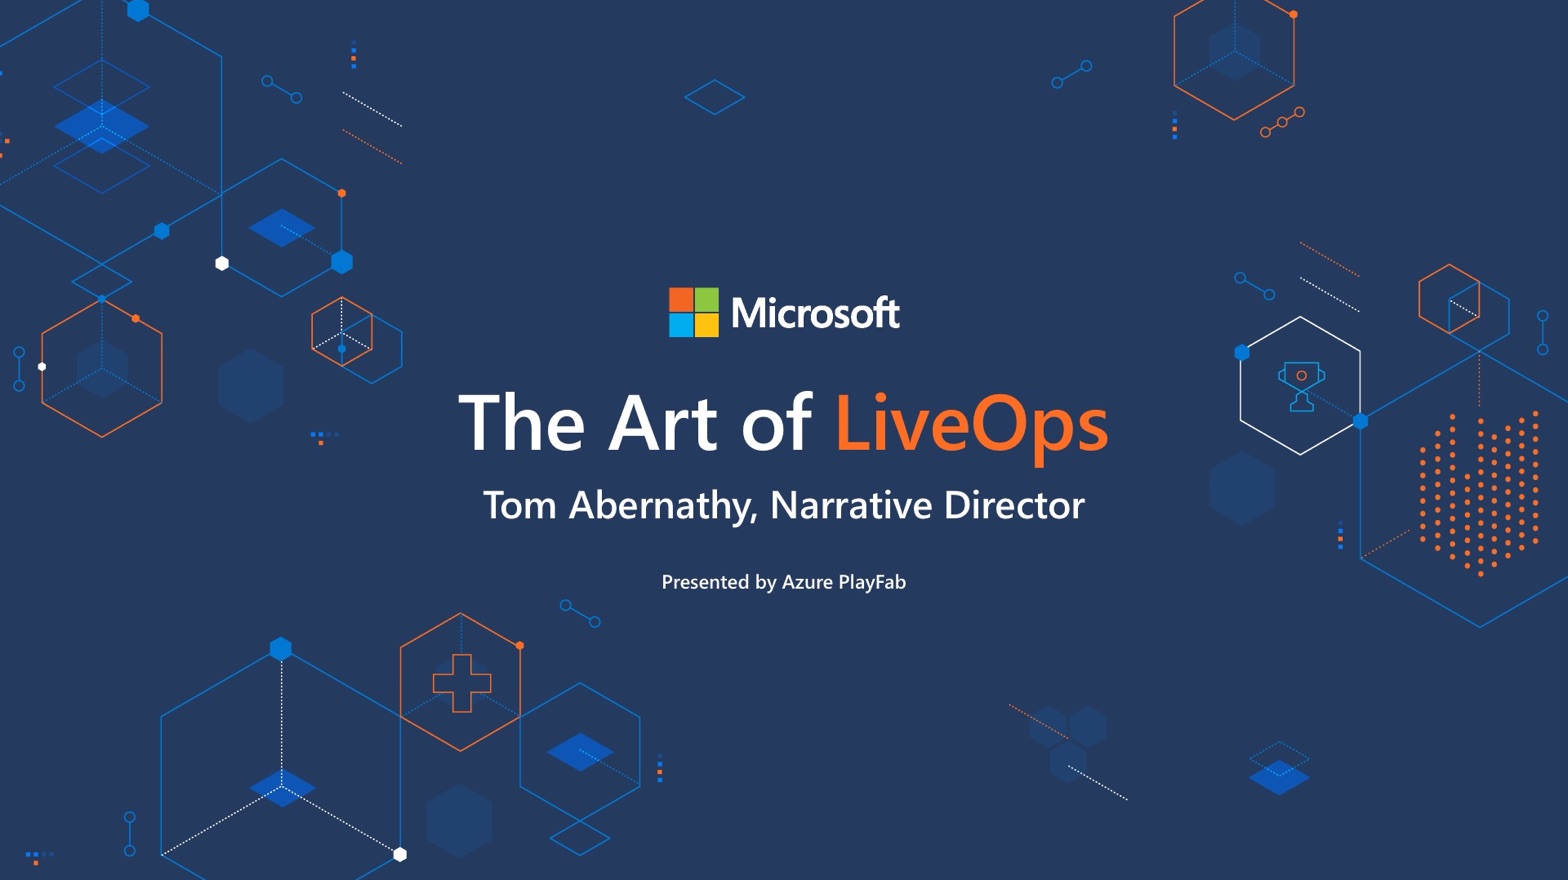 Hero image for The Art of LiveOps post featuring Tom Abernathy